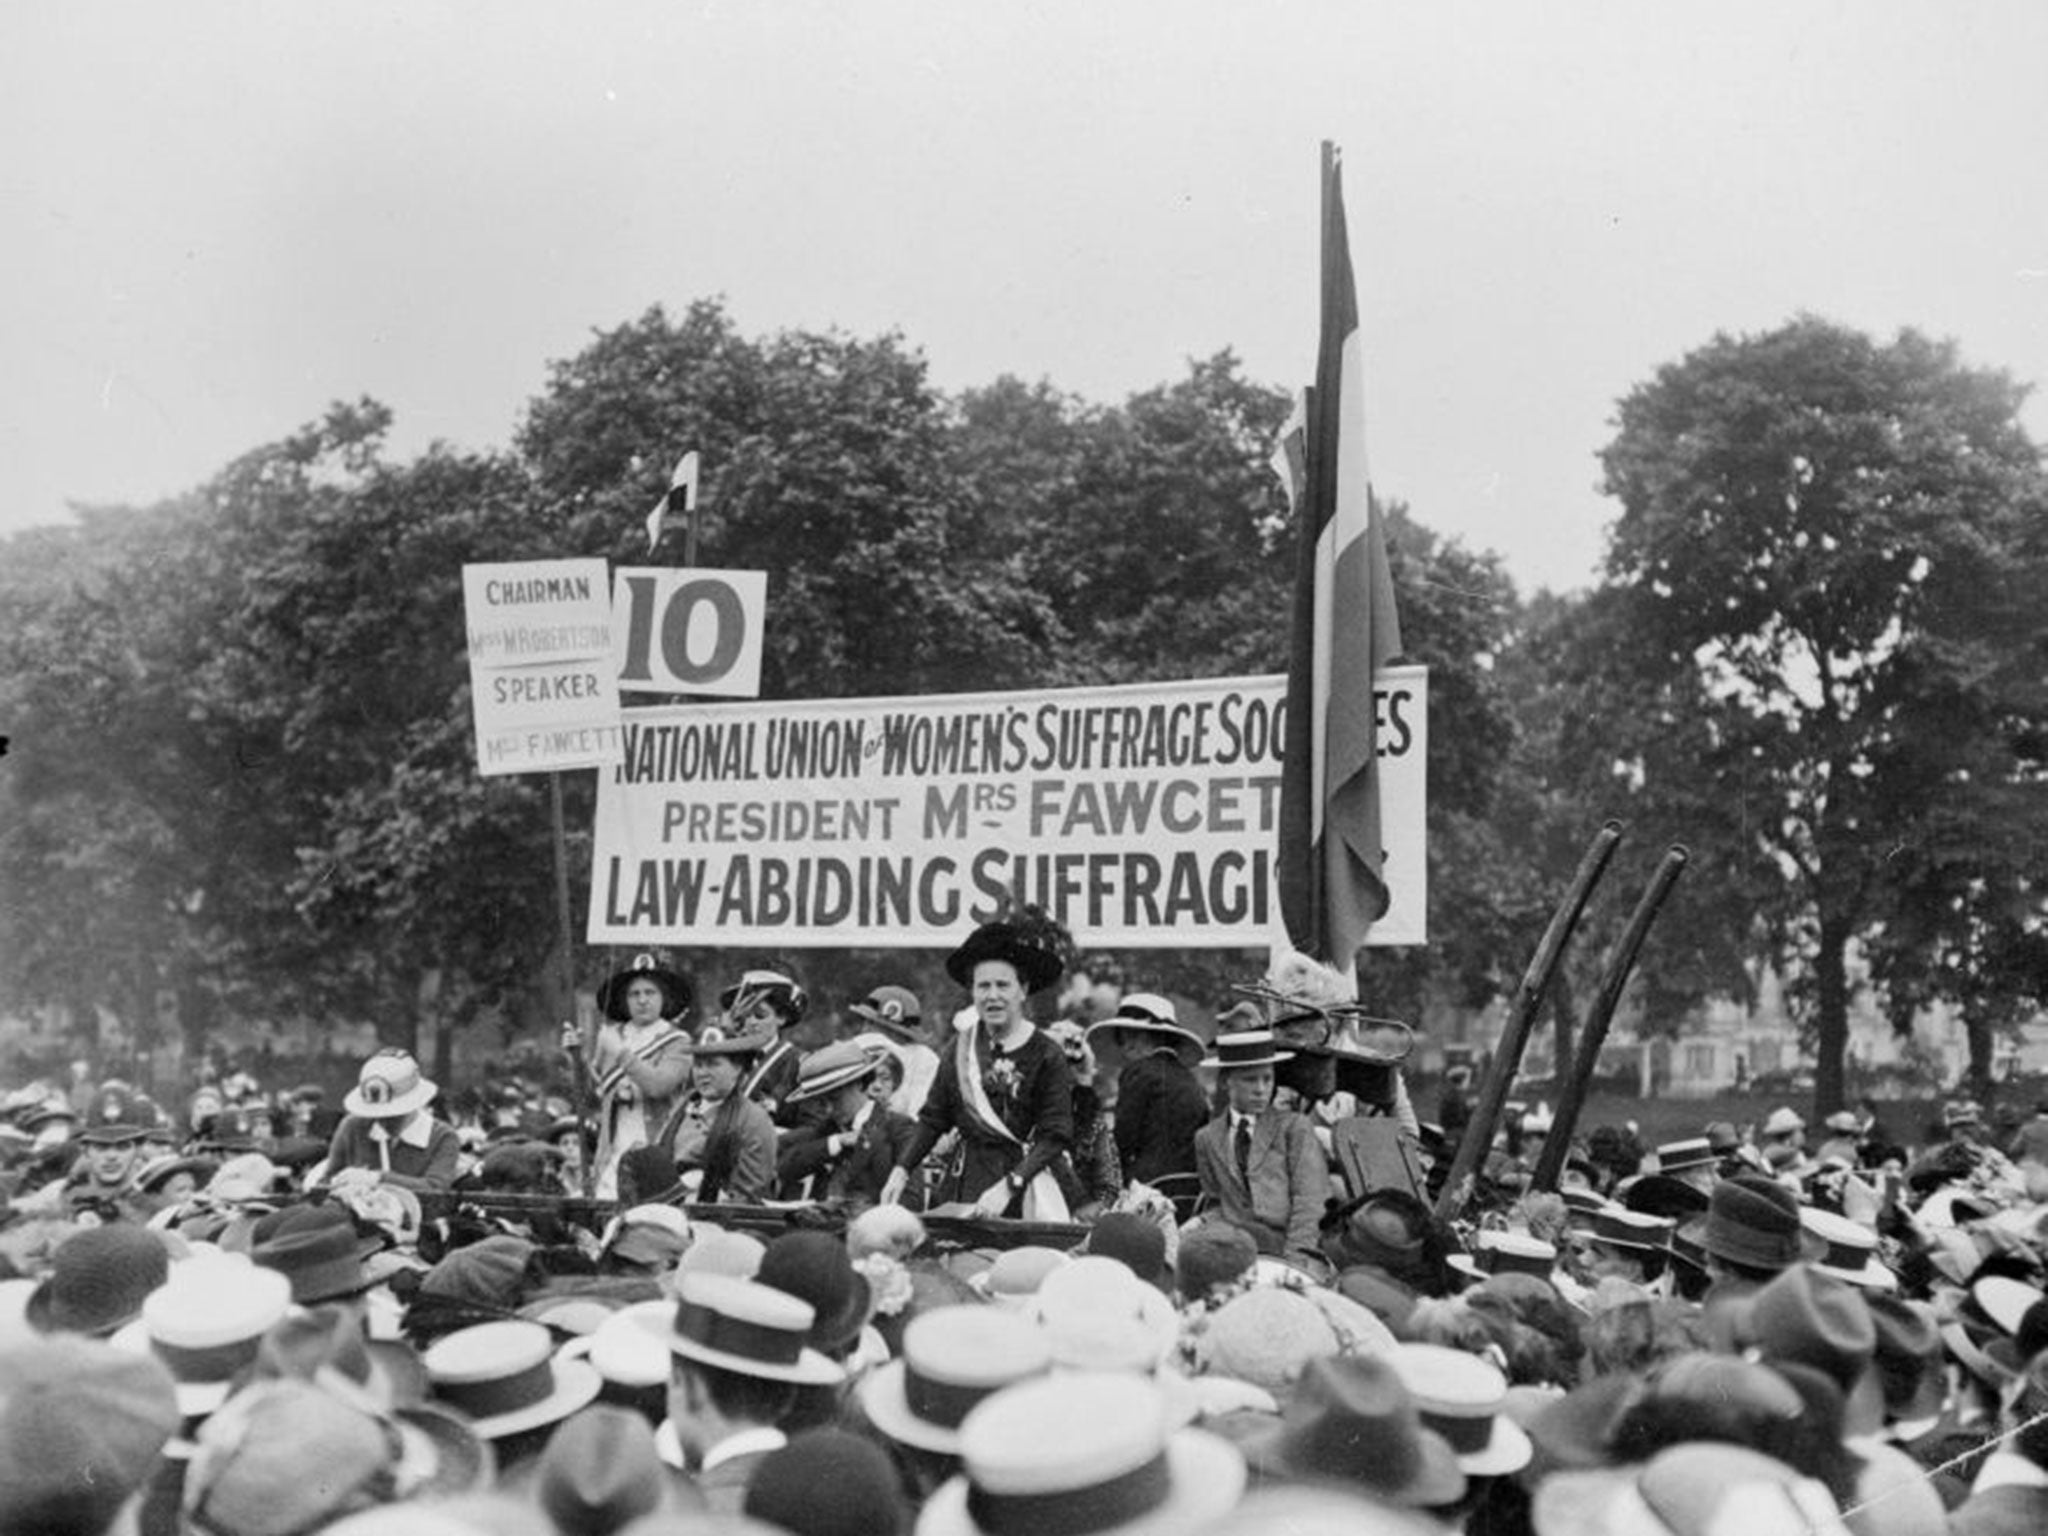 A suffragist rally in Hyde Park